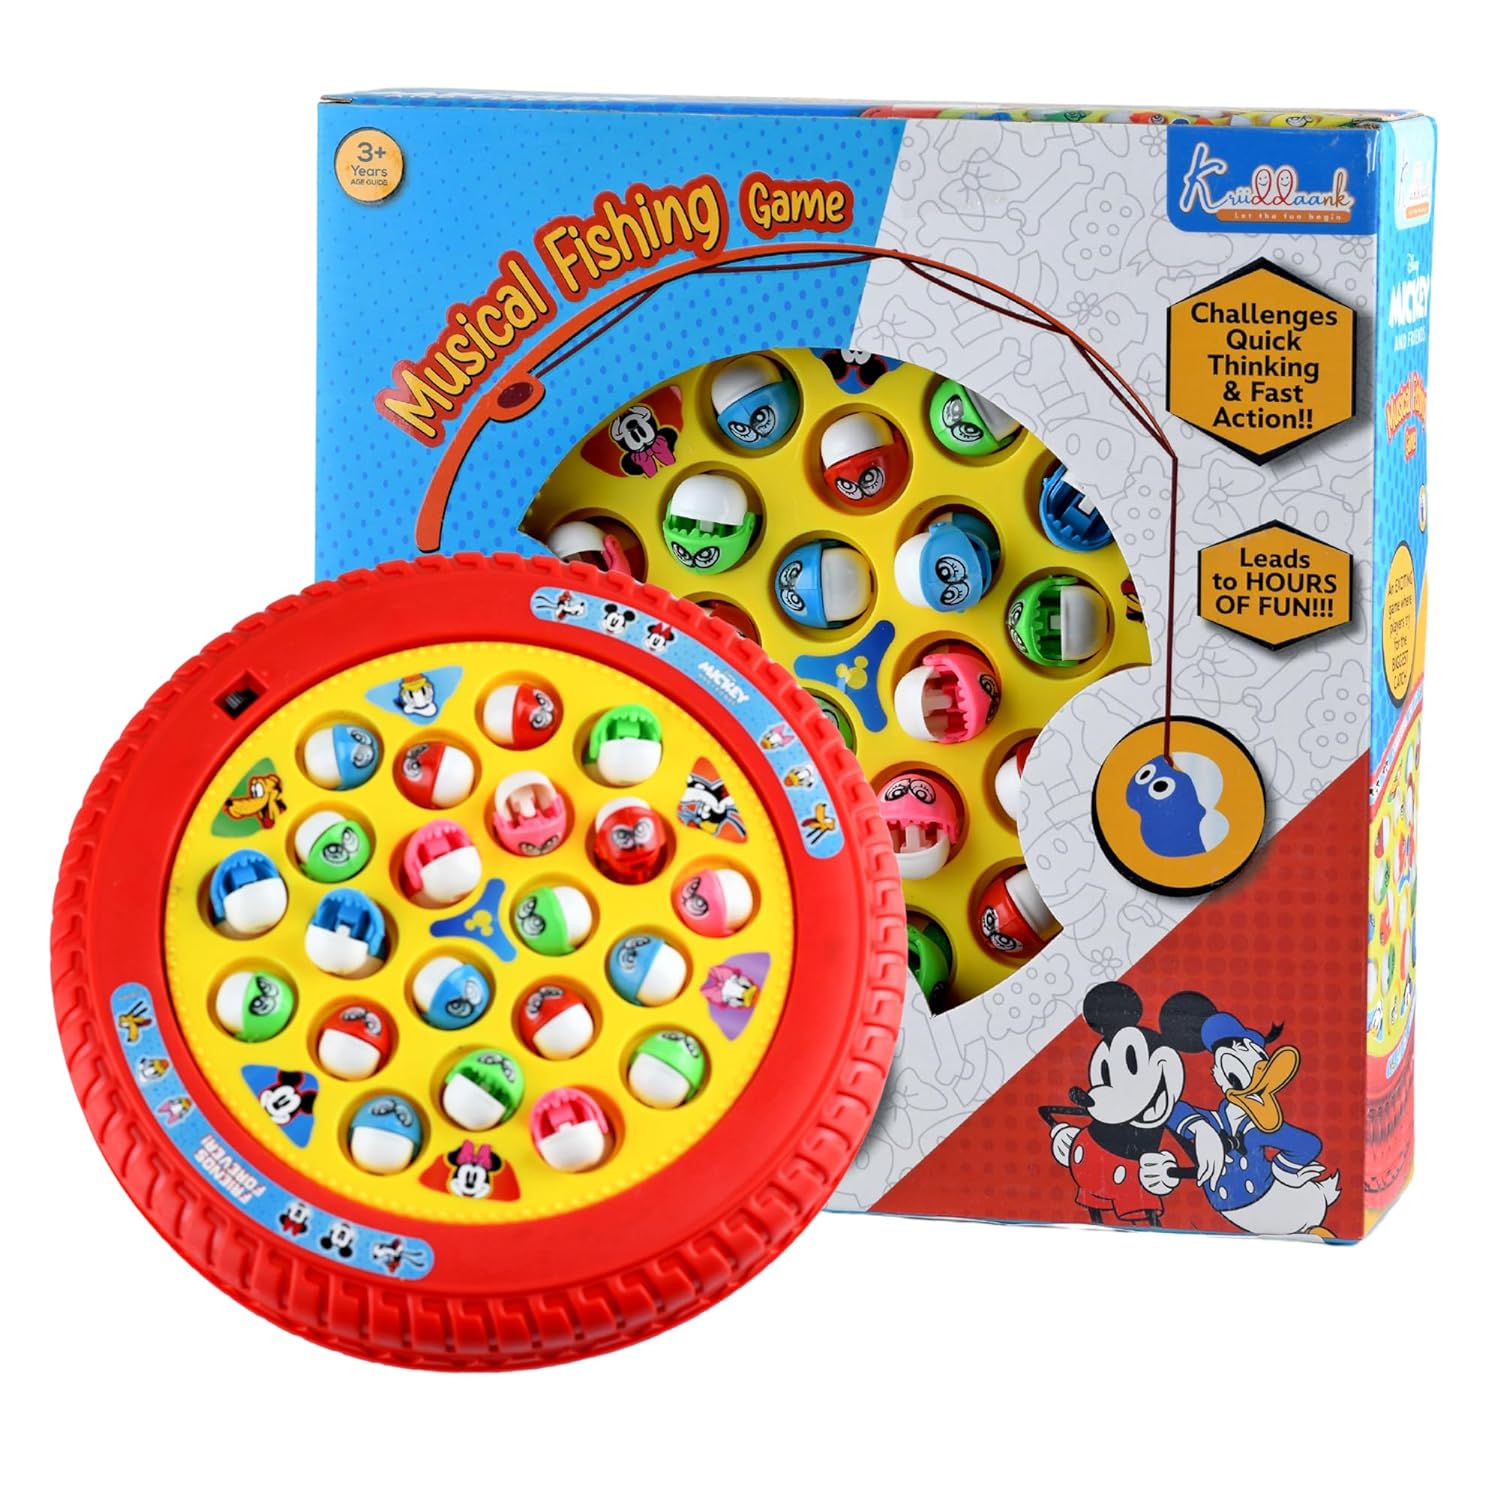 Disney Mickey Medium Musical Fishing Game Fish Catching Board Game Toy 21 Fishes with Medium Round Pond & 4 Fish Catching Sticks for Kids